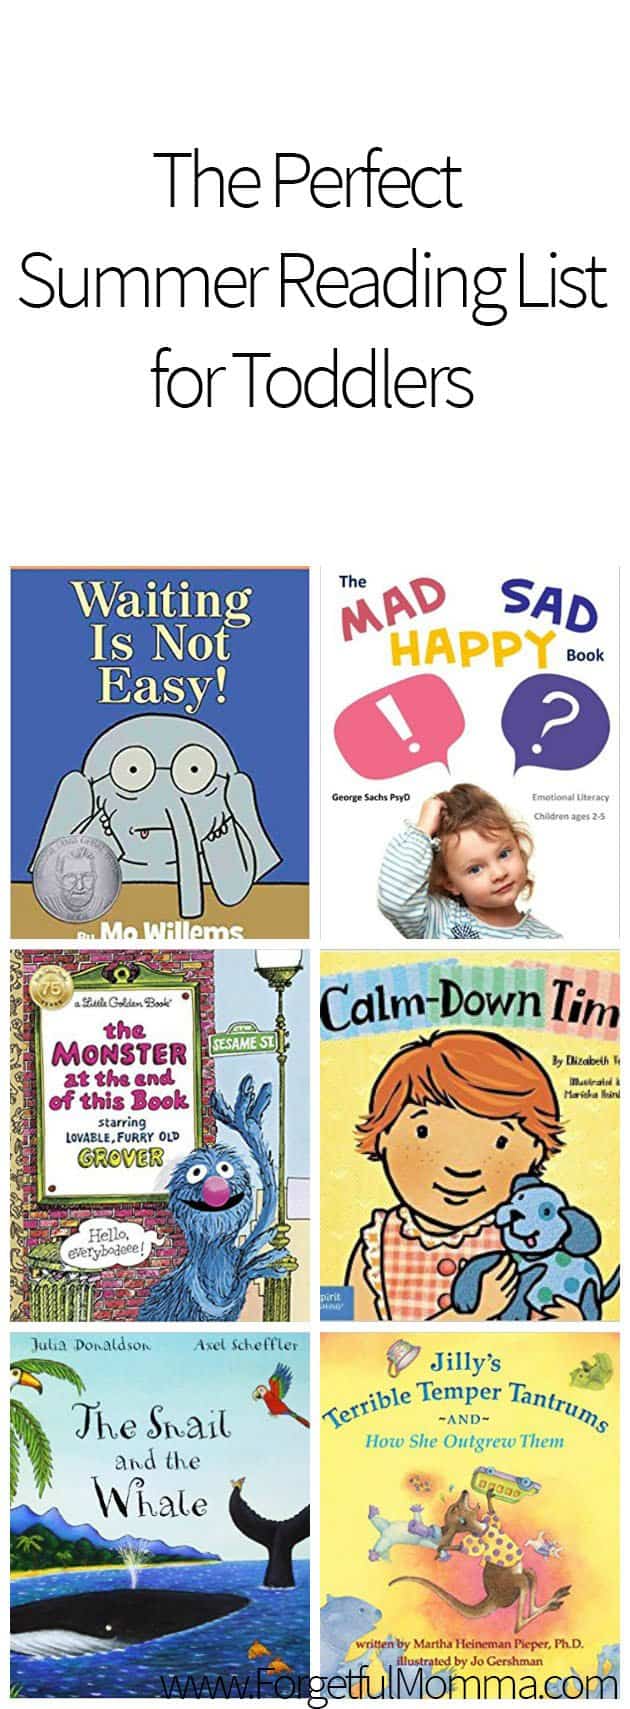 The Perfect Summer Reading List for Toddlers